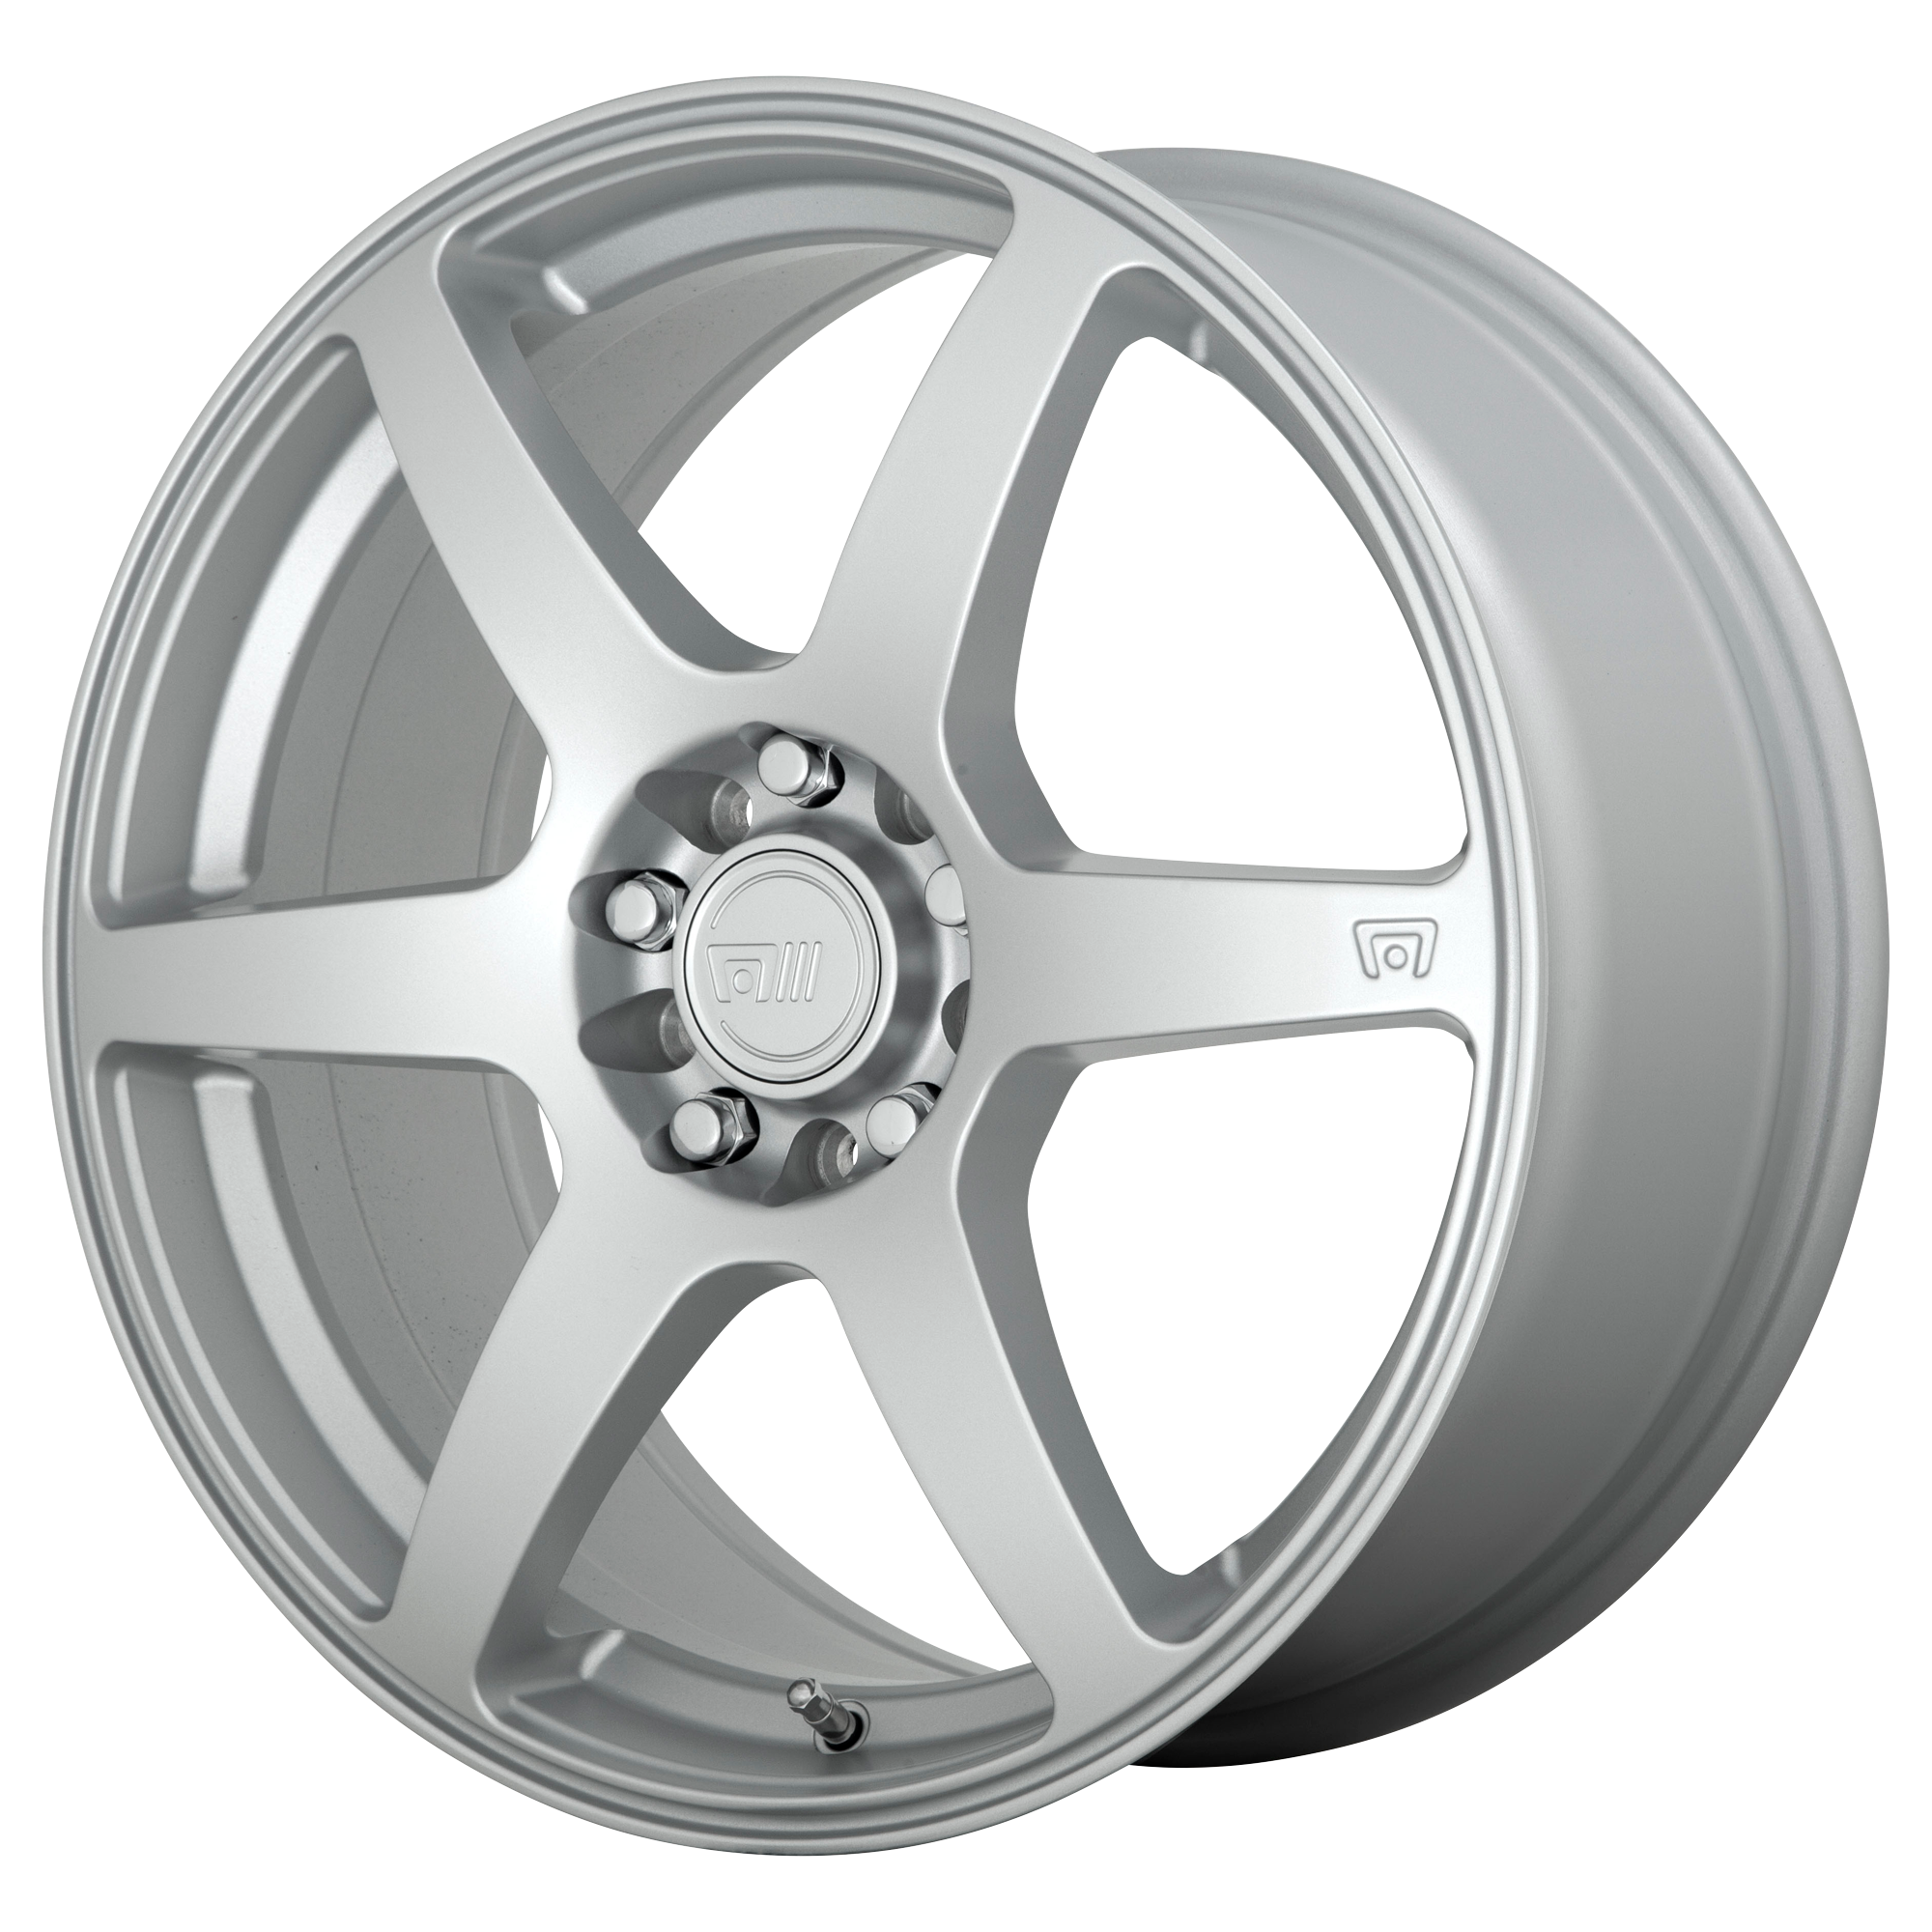 CS6 16x7 5x100.00/5x105.00 HYPER SILVER (40 mm) - Tires and Engine Performance